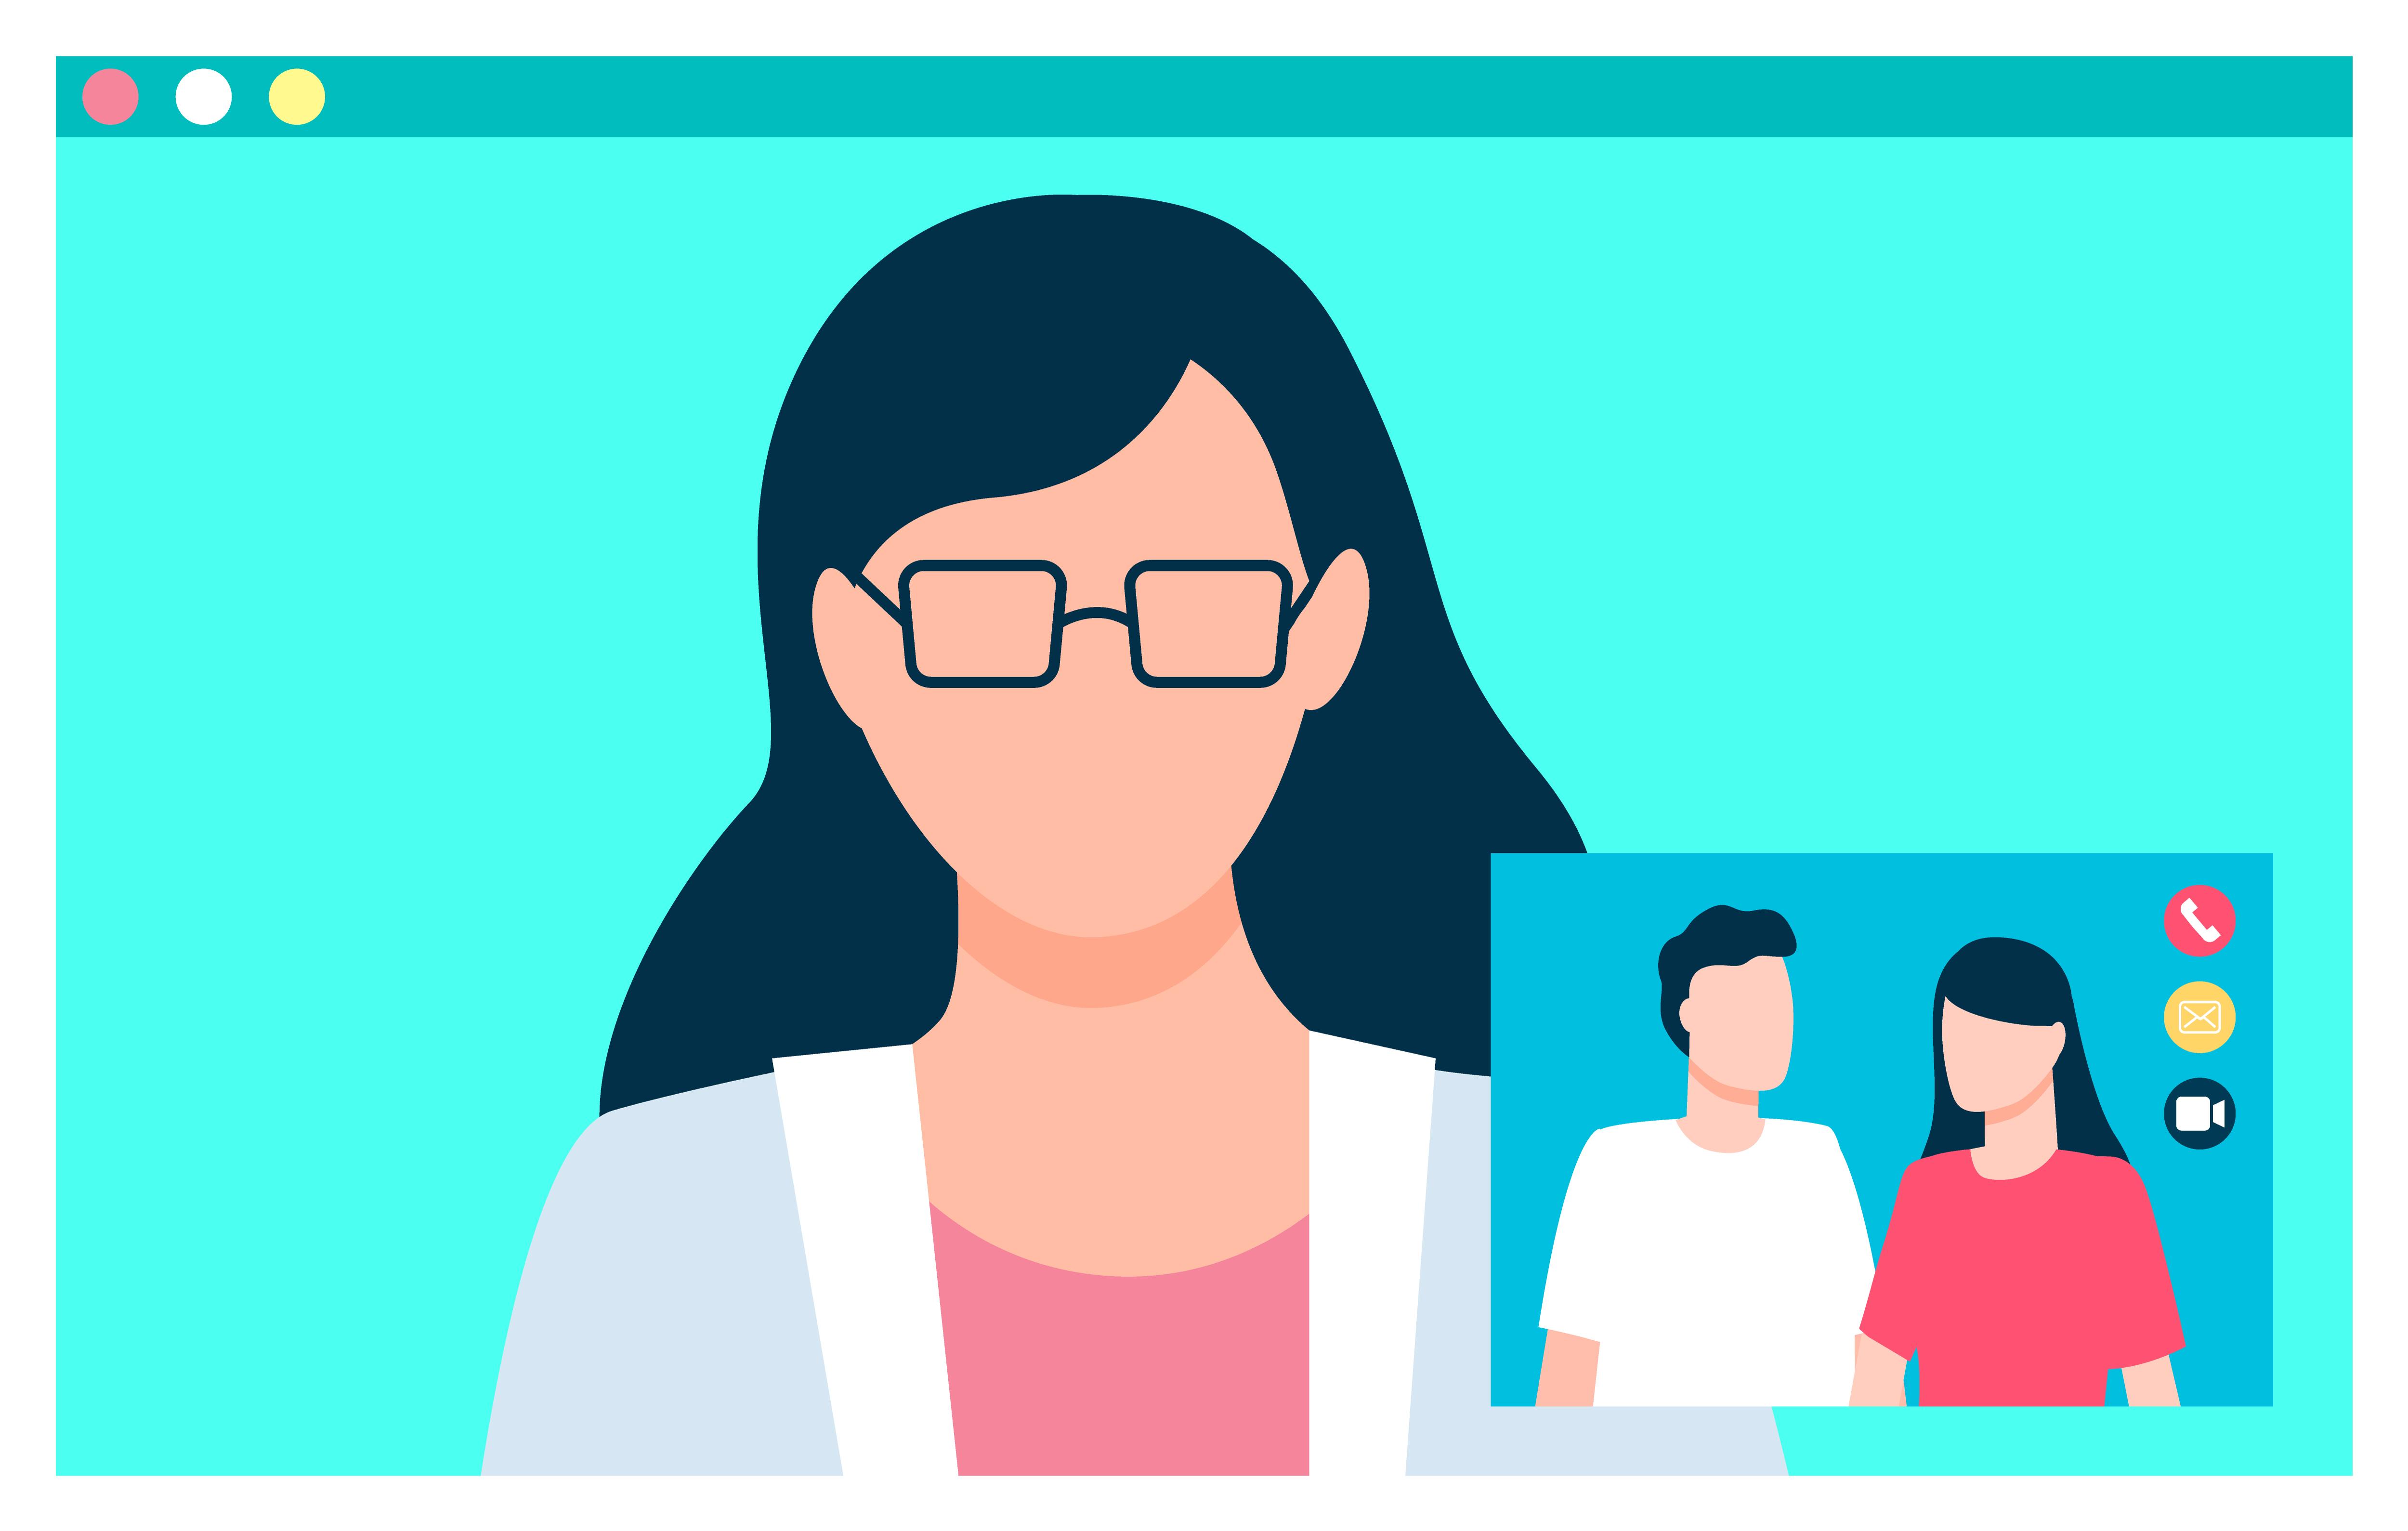 Online conversation, consultation between people by internet call with video in real time. Videoconference to talk with person, consultant remotely. Vector illustration of technology in flat style. Conversation Between People by Internet Video Call